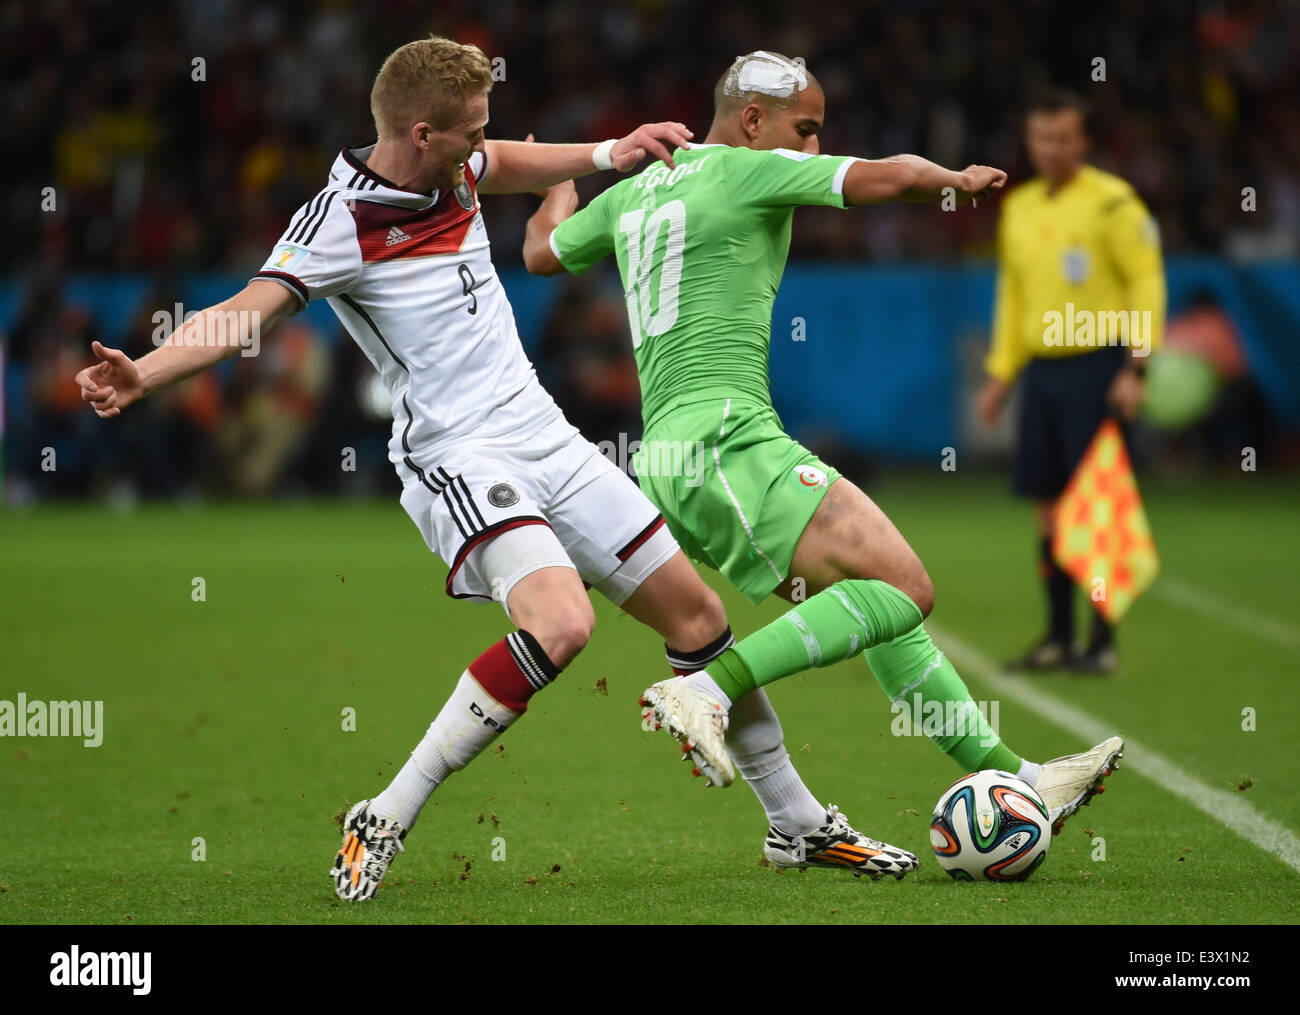 Porto Alegre, Brazil. 30th June, 2014. Algeria's Sofiane Feghouli (R) vies with Germany's Andre Schurrle during a Round of 16 match between Germany and Algeria of 2014 FIFA World Cup at the Estadio Beira-Rio Stadium in Porto Alegre, Brazil, on June 30, 2014. Credit:  Li Ga/Xinhua/Alamy Live News Stock Photo